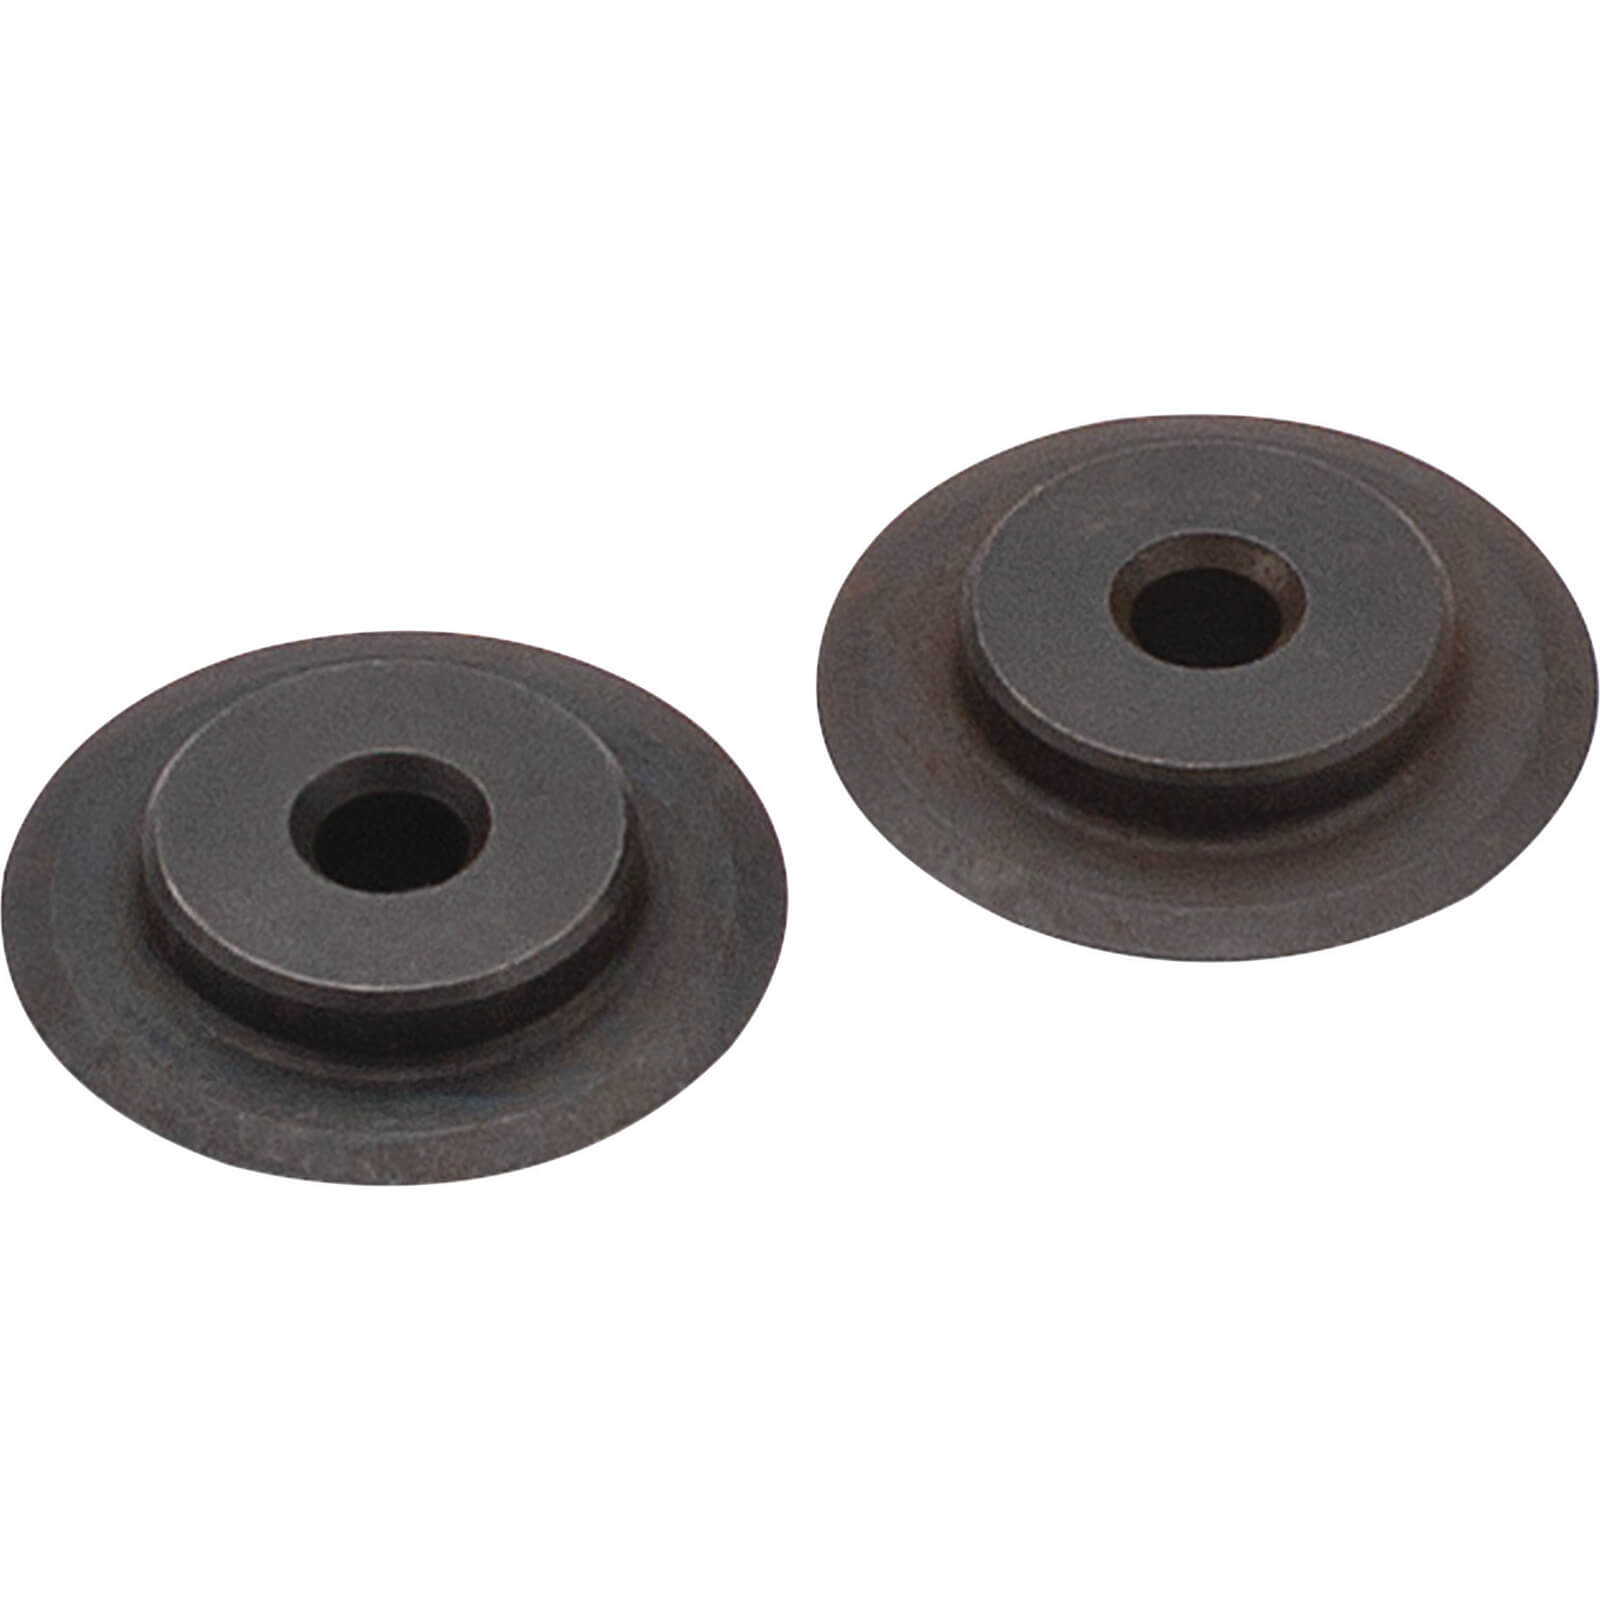 Image of Draper Replacement Wheel for 81078 and 81095 Ratchet Pipe Cutters